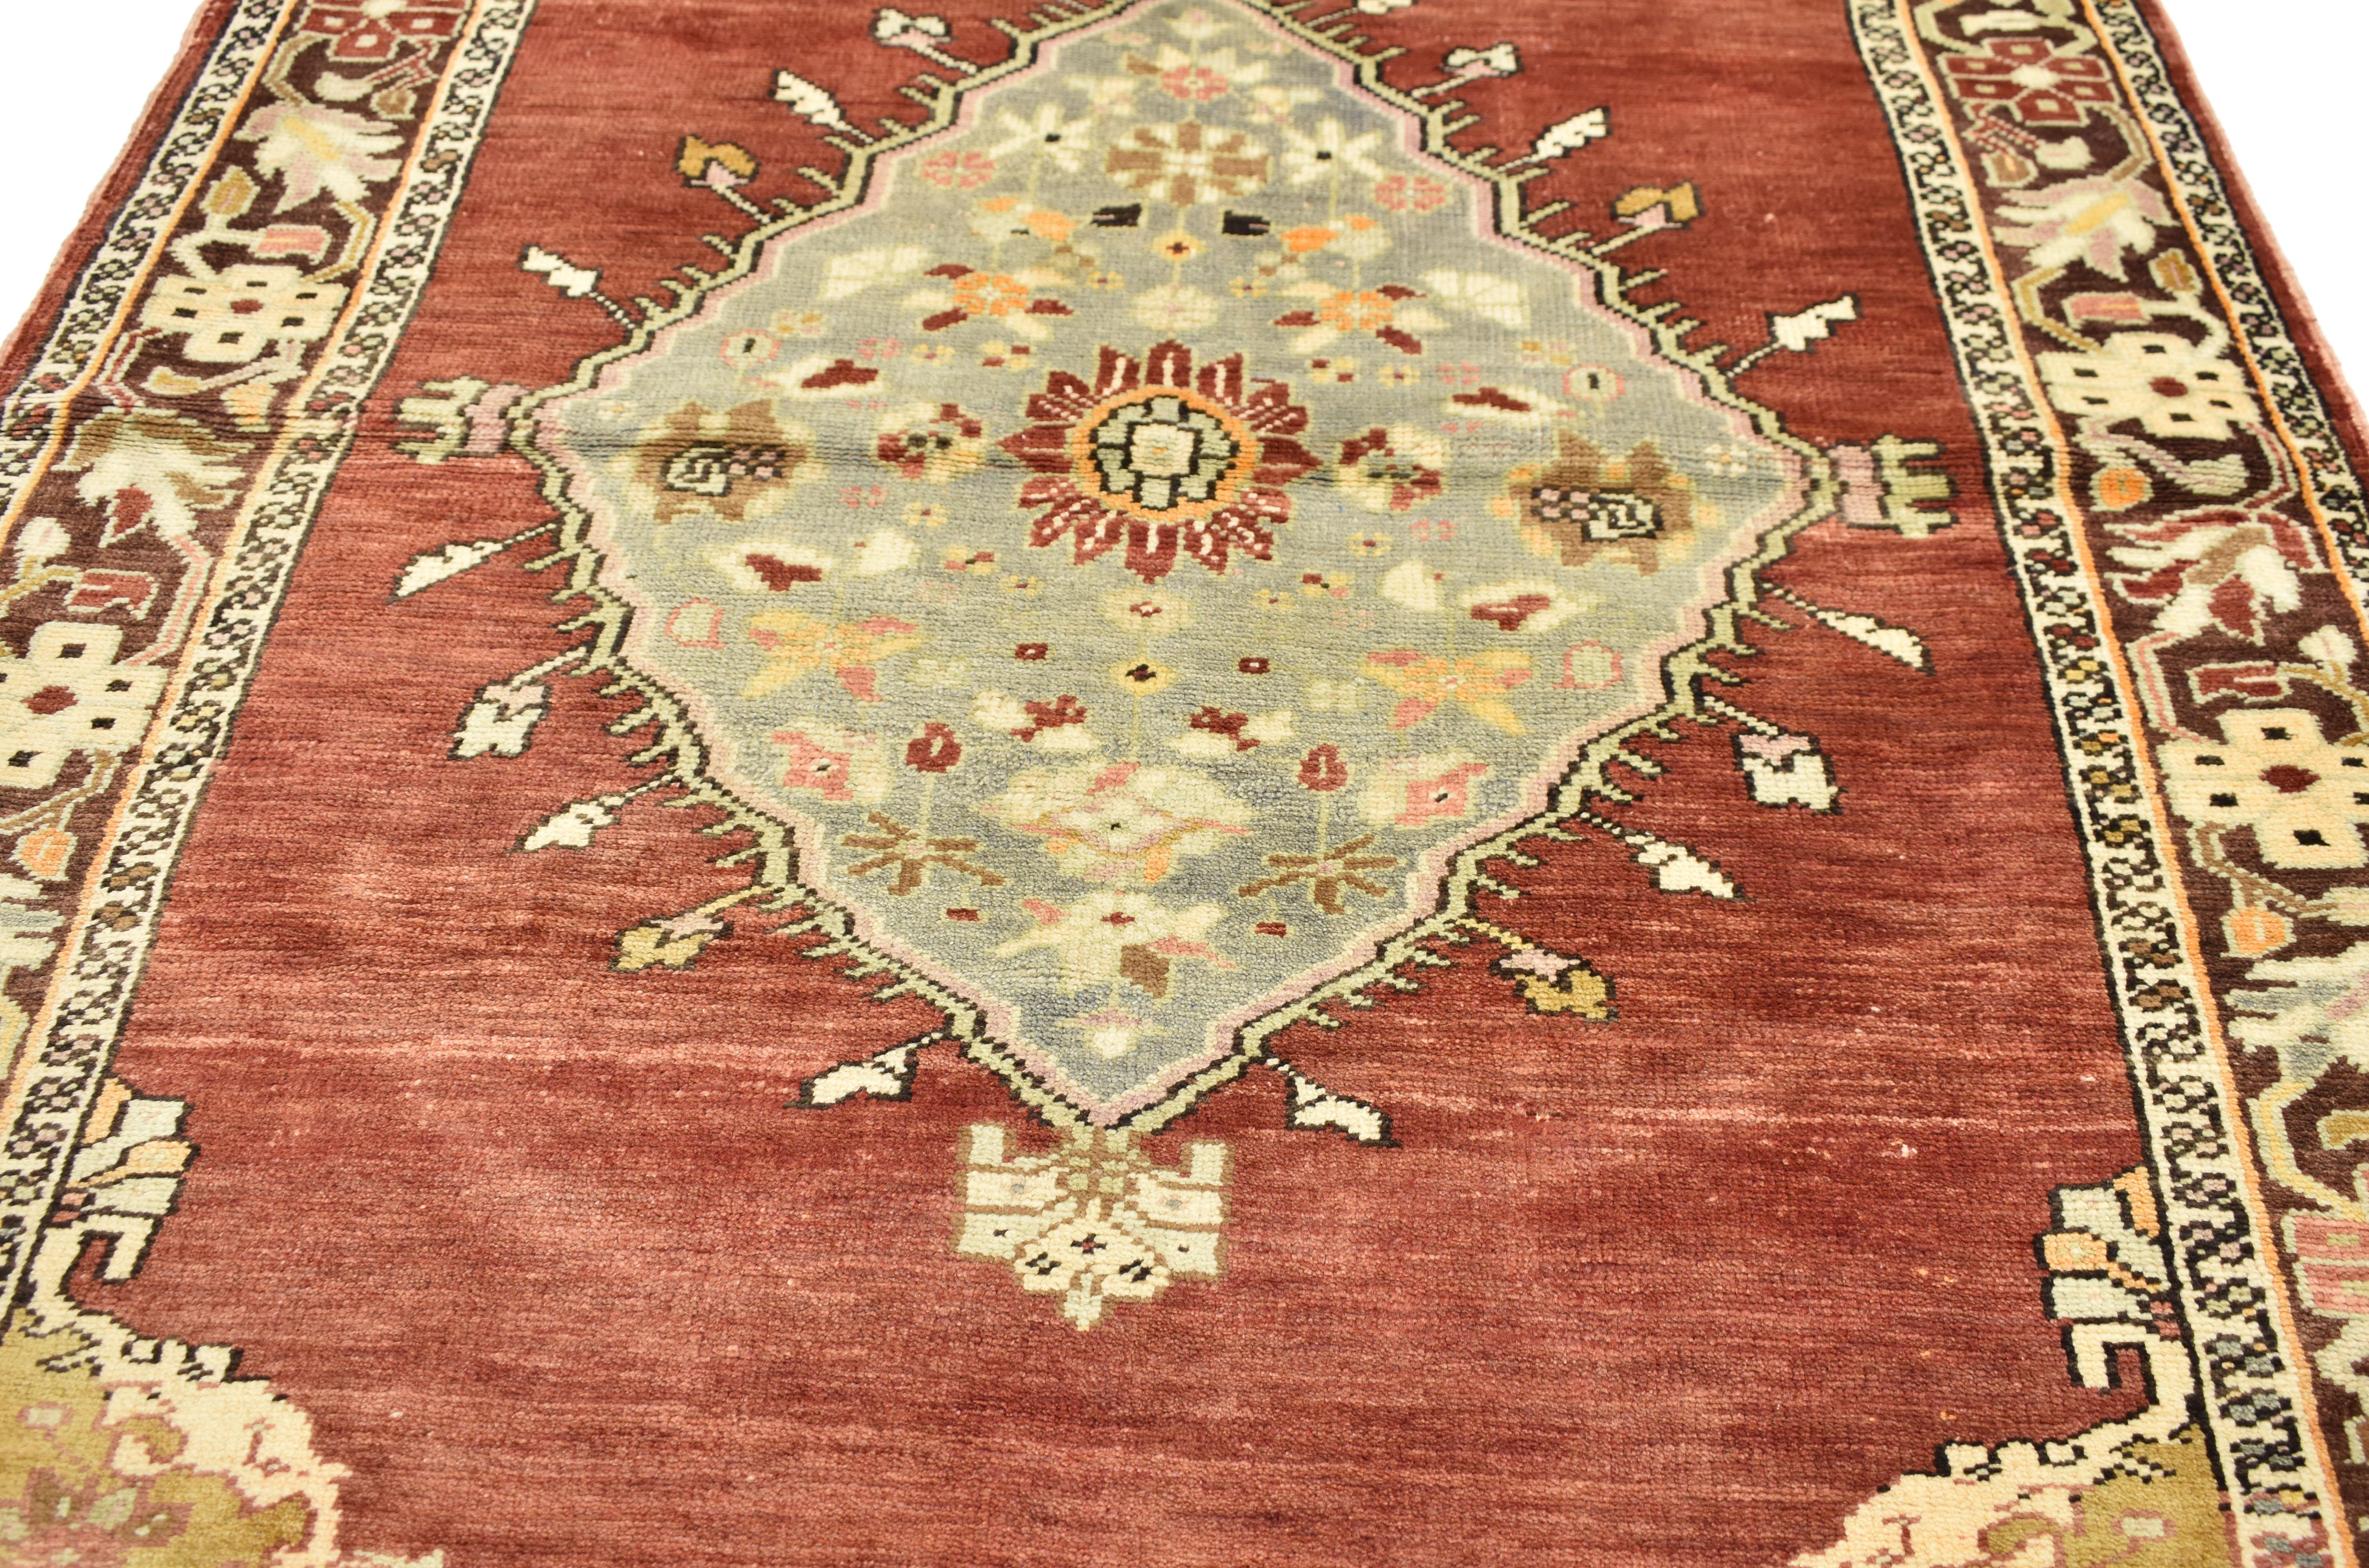 73838, vintage Turkish Oushak accent rug, entry or foyer rug. This hand knotted wool vintage Turkish Oushak rug features a gray centre medallion flanked with finials and filled with blooming flowers and palmettes. The medallion is outlined in jagged